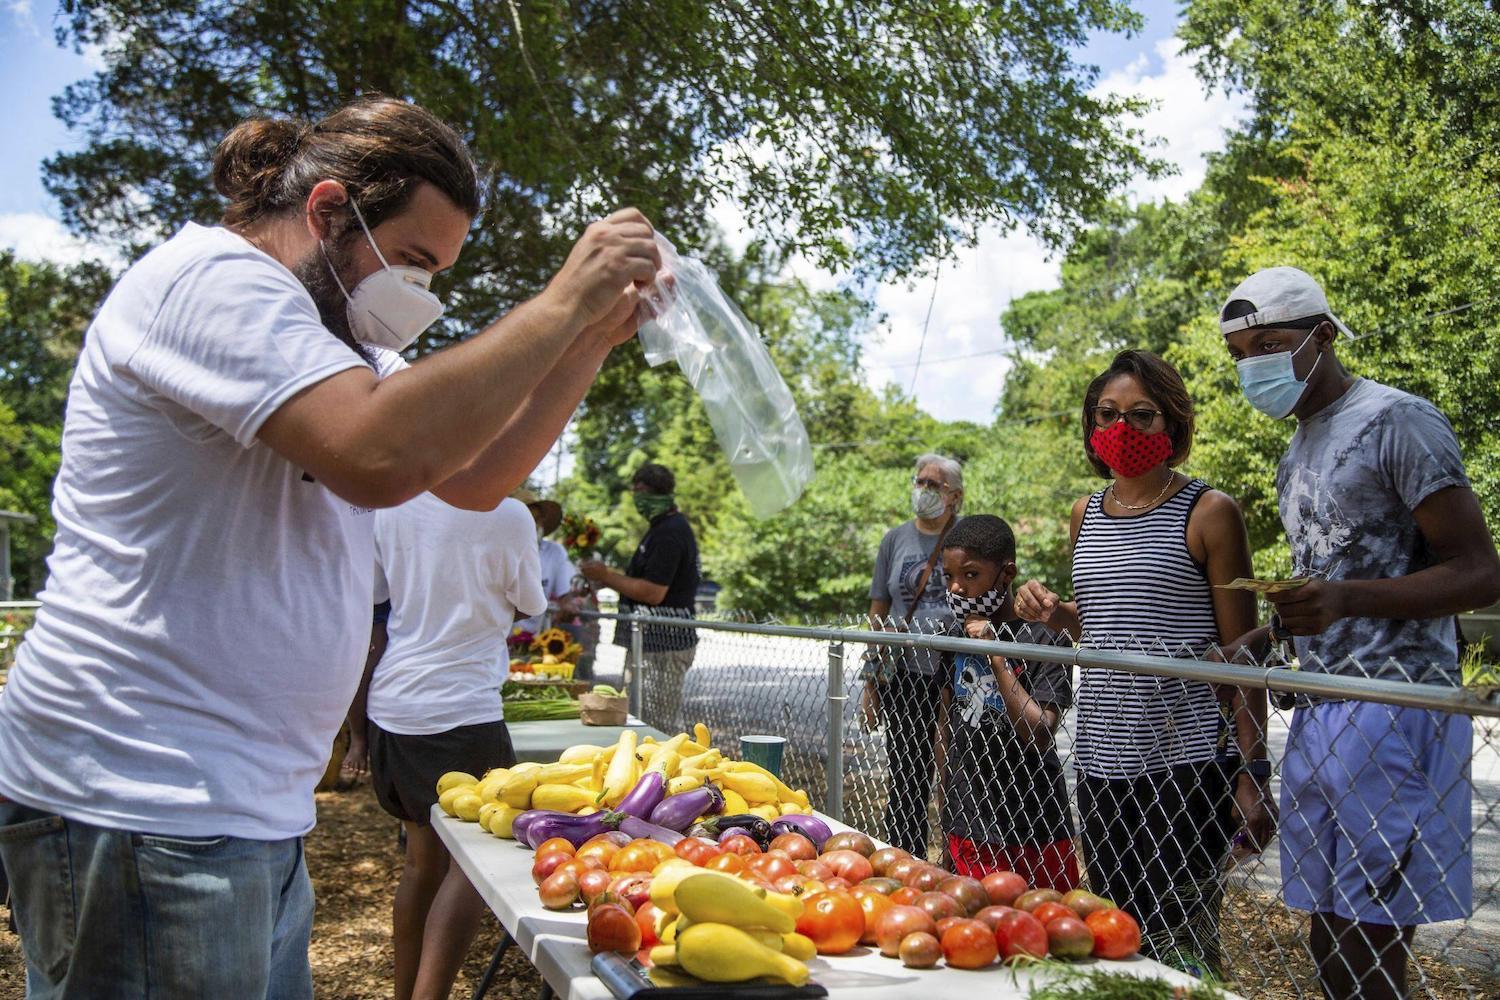 Jason Rolland sells vegetables to Gretchen Barron and her family at the Pinehurst Farmers Market on Wednesday, July 22, 2020, in Columbia, S.C.